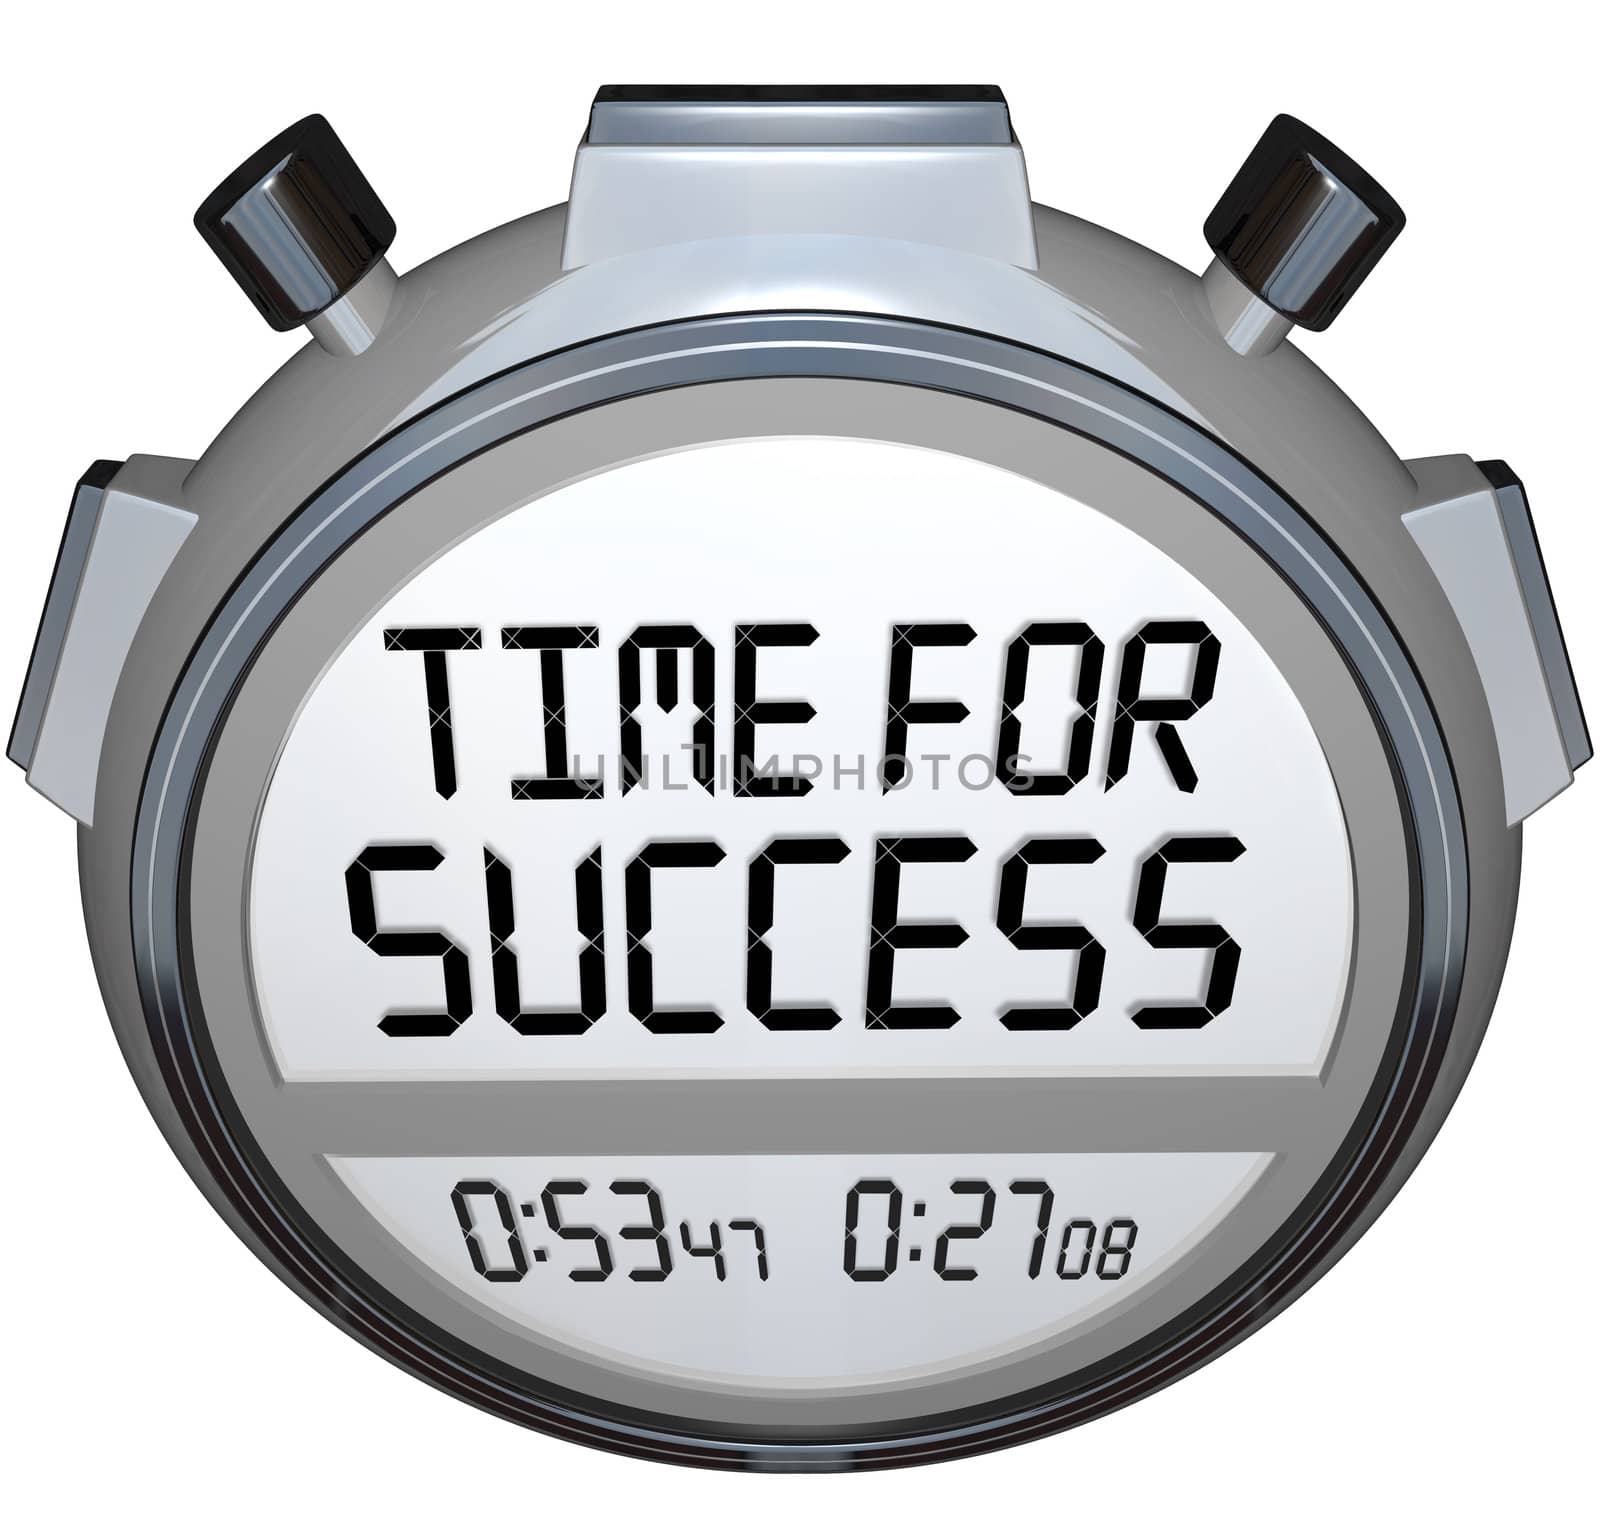 A stopwatch timer shows the words Time for Success indicating it is now the moment to give your all in an effort to achieve your goal and win the competition in a sporting event or other contest